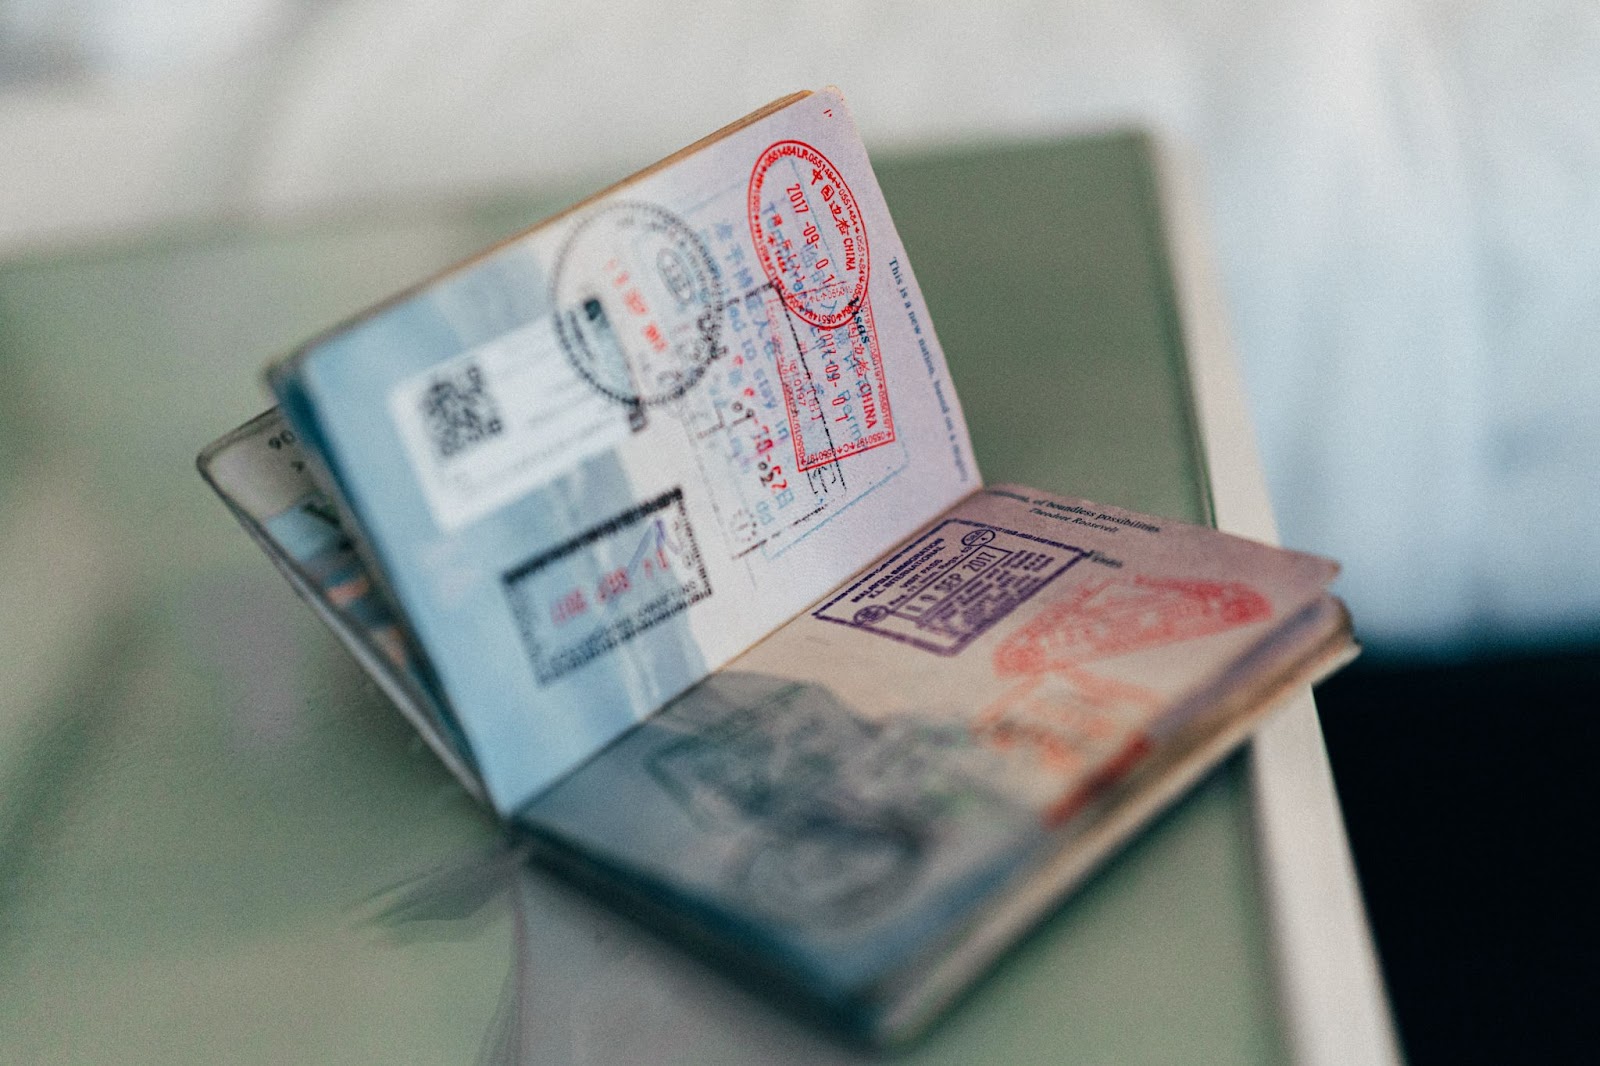 open passport showing many stamps from different countries